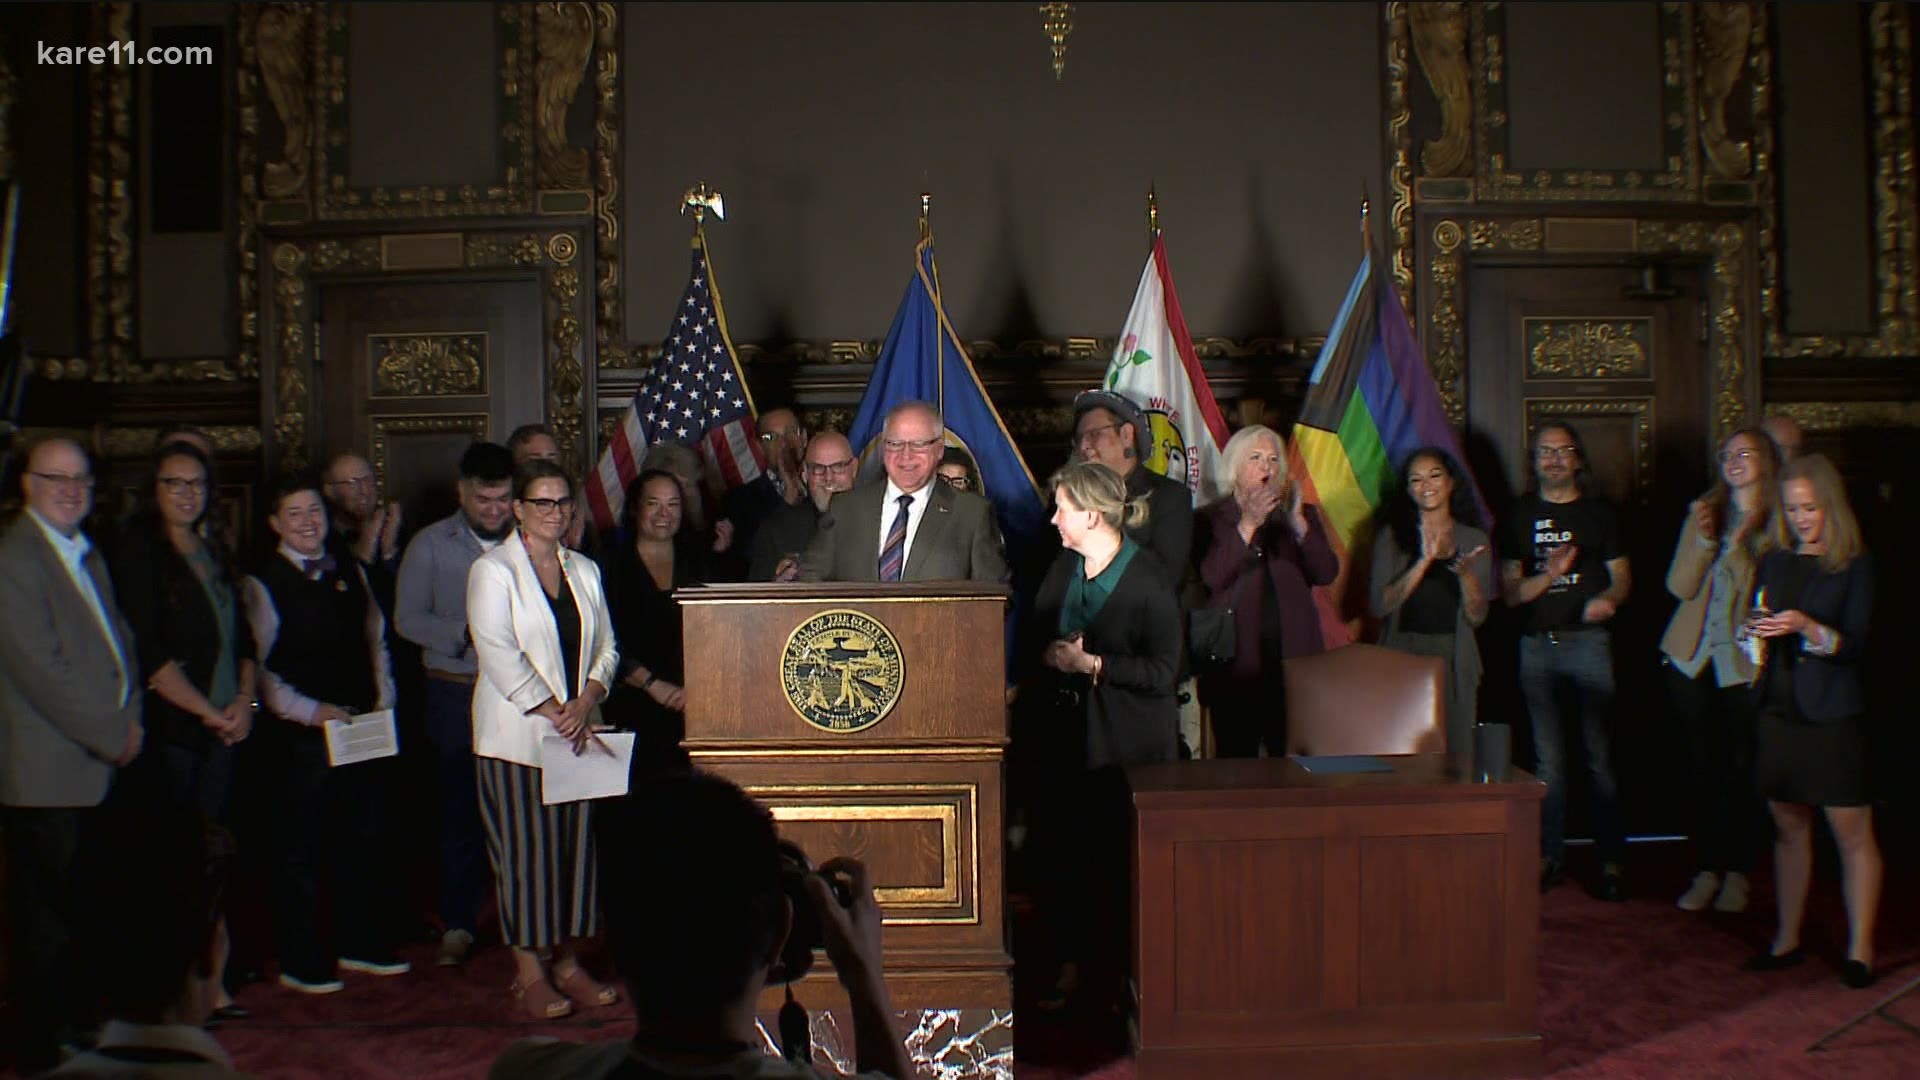 The governor says Minnesota is one of 24 states that has taken action against the practice that tries to change a person's sexual orientation or gender identity